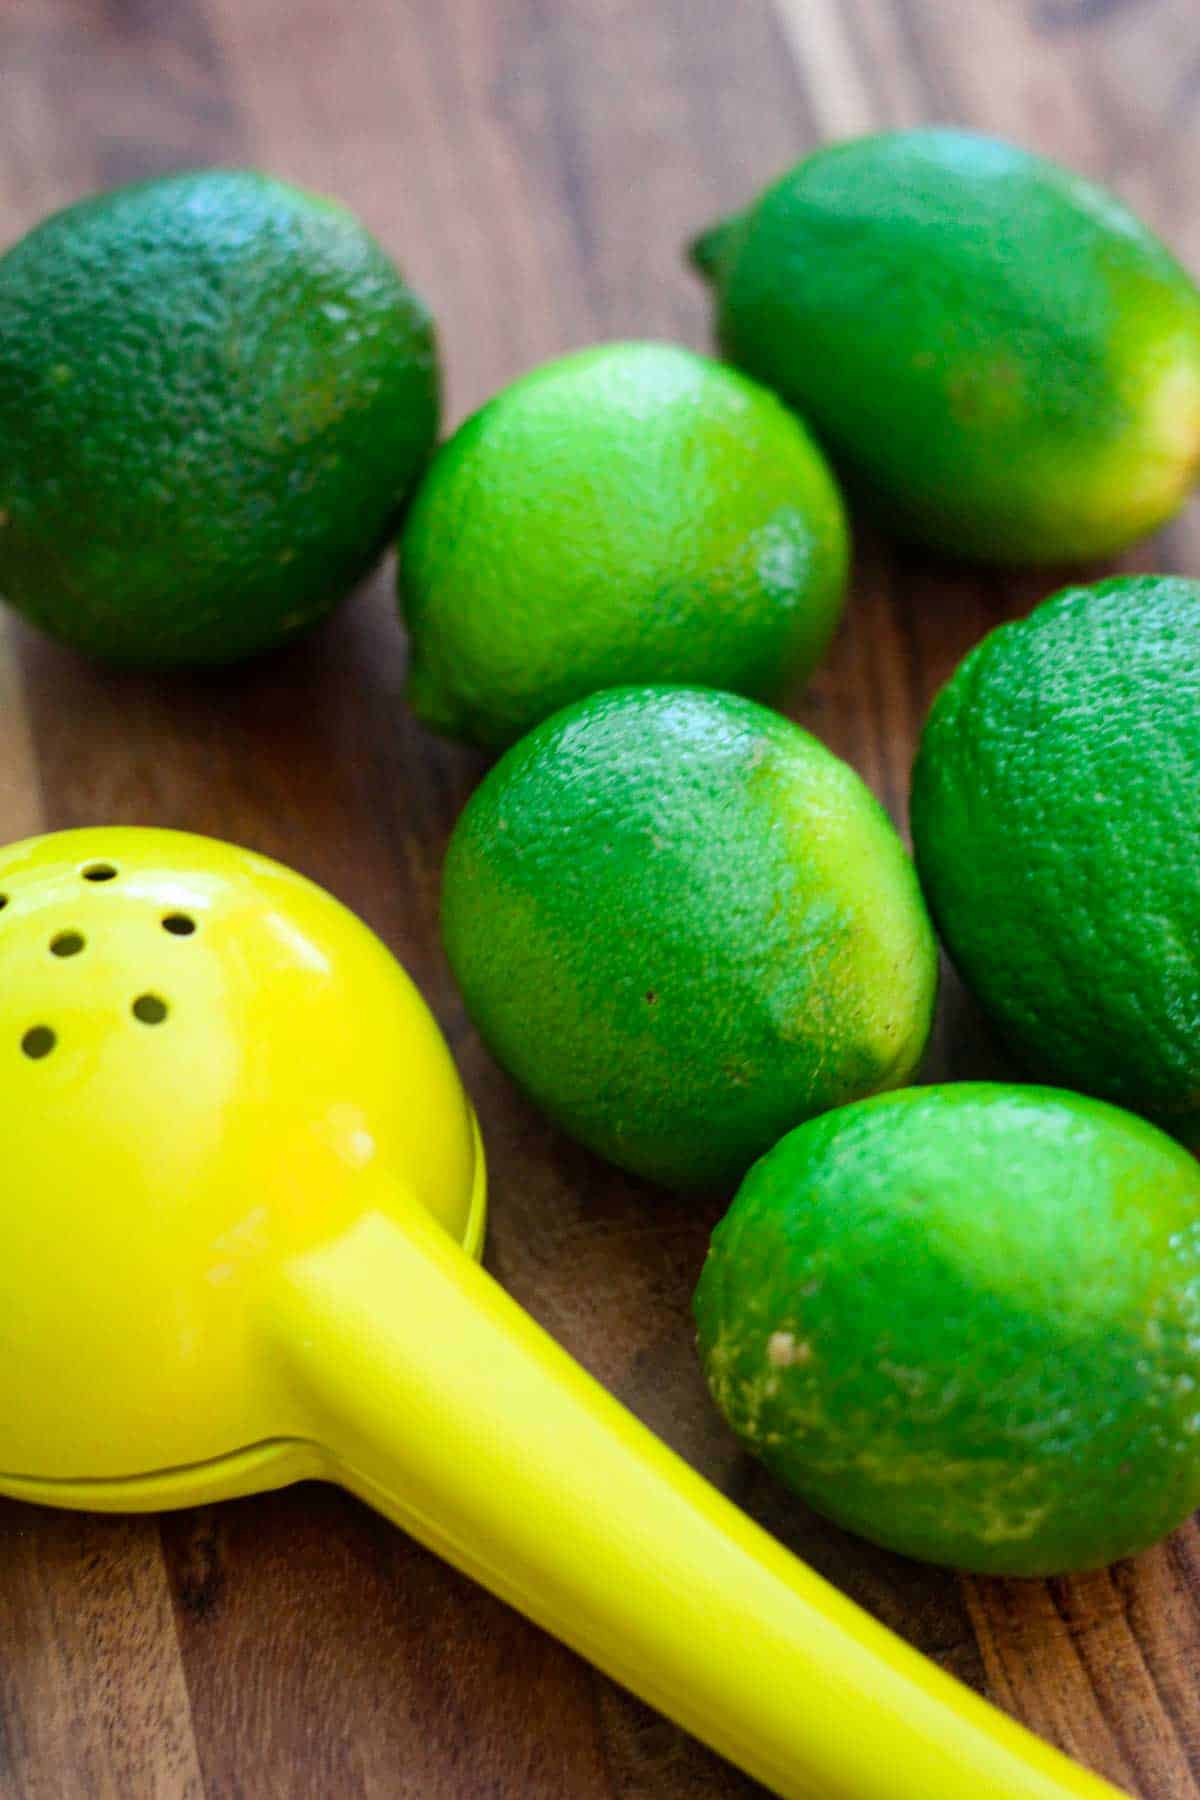 Limes next to a citrus squeezer, ready to make ceviche.